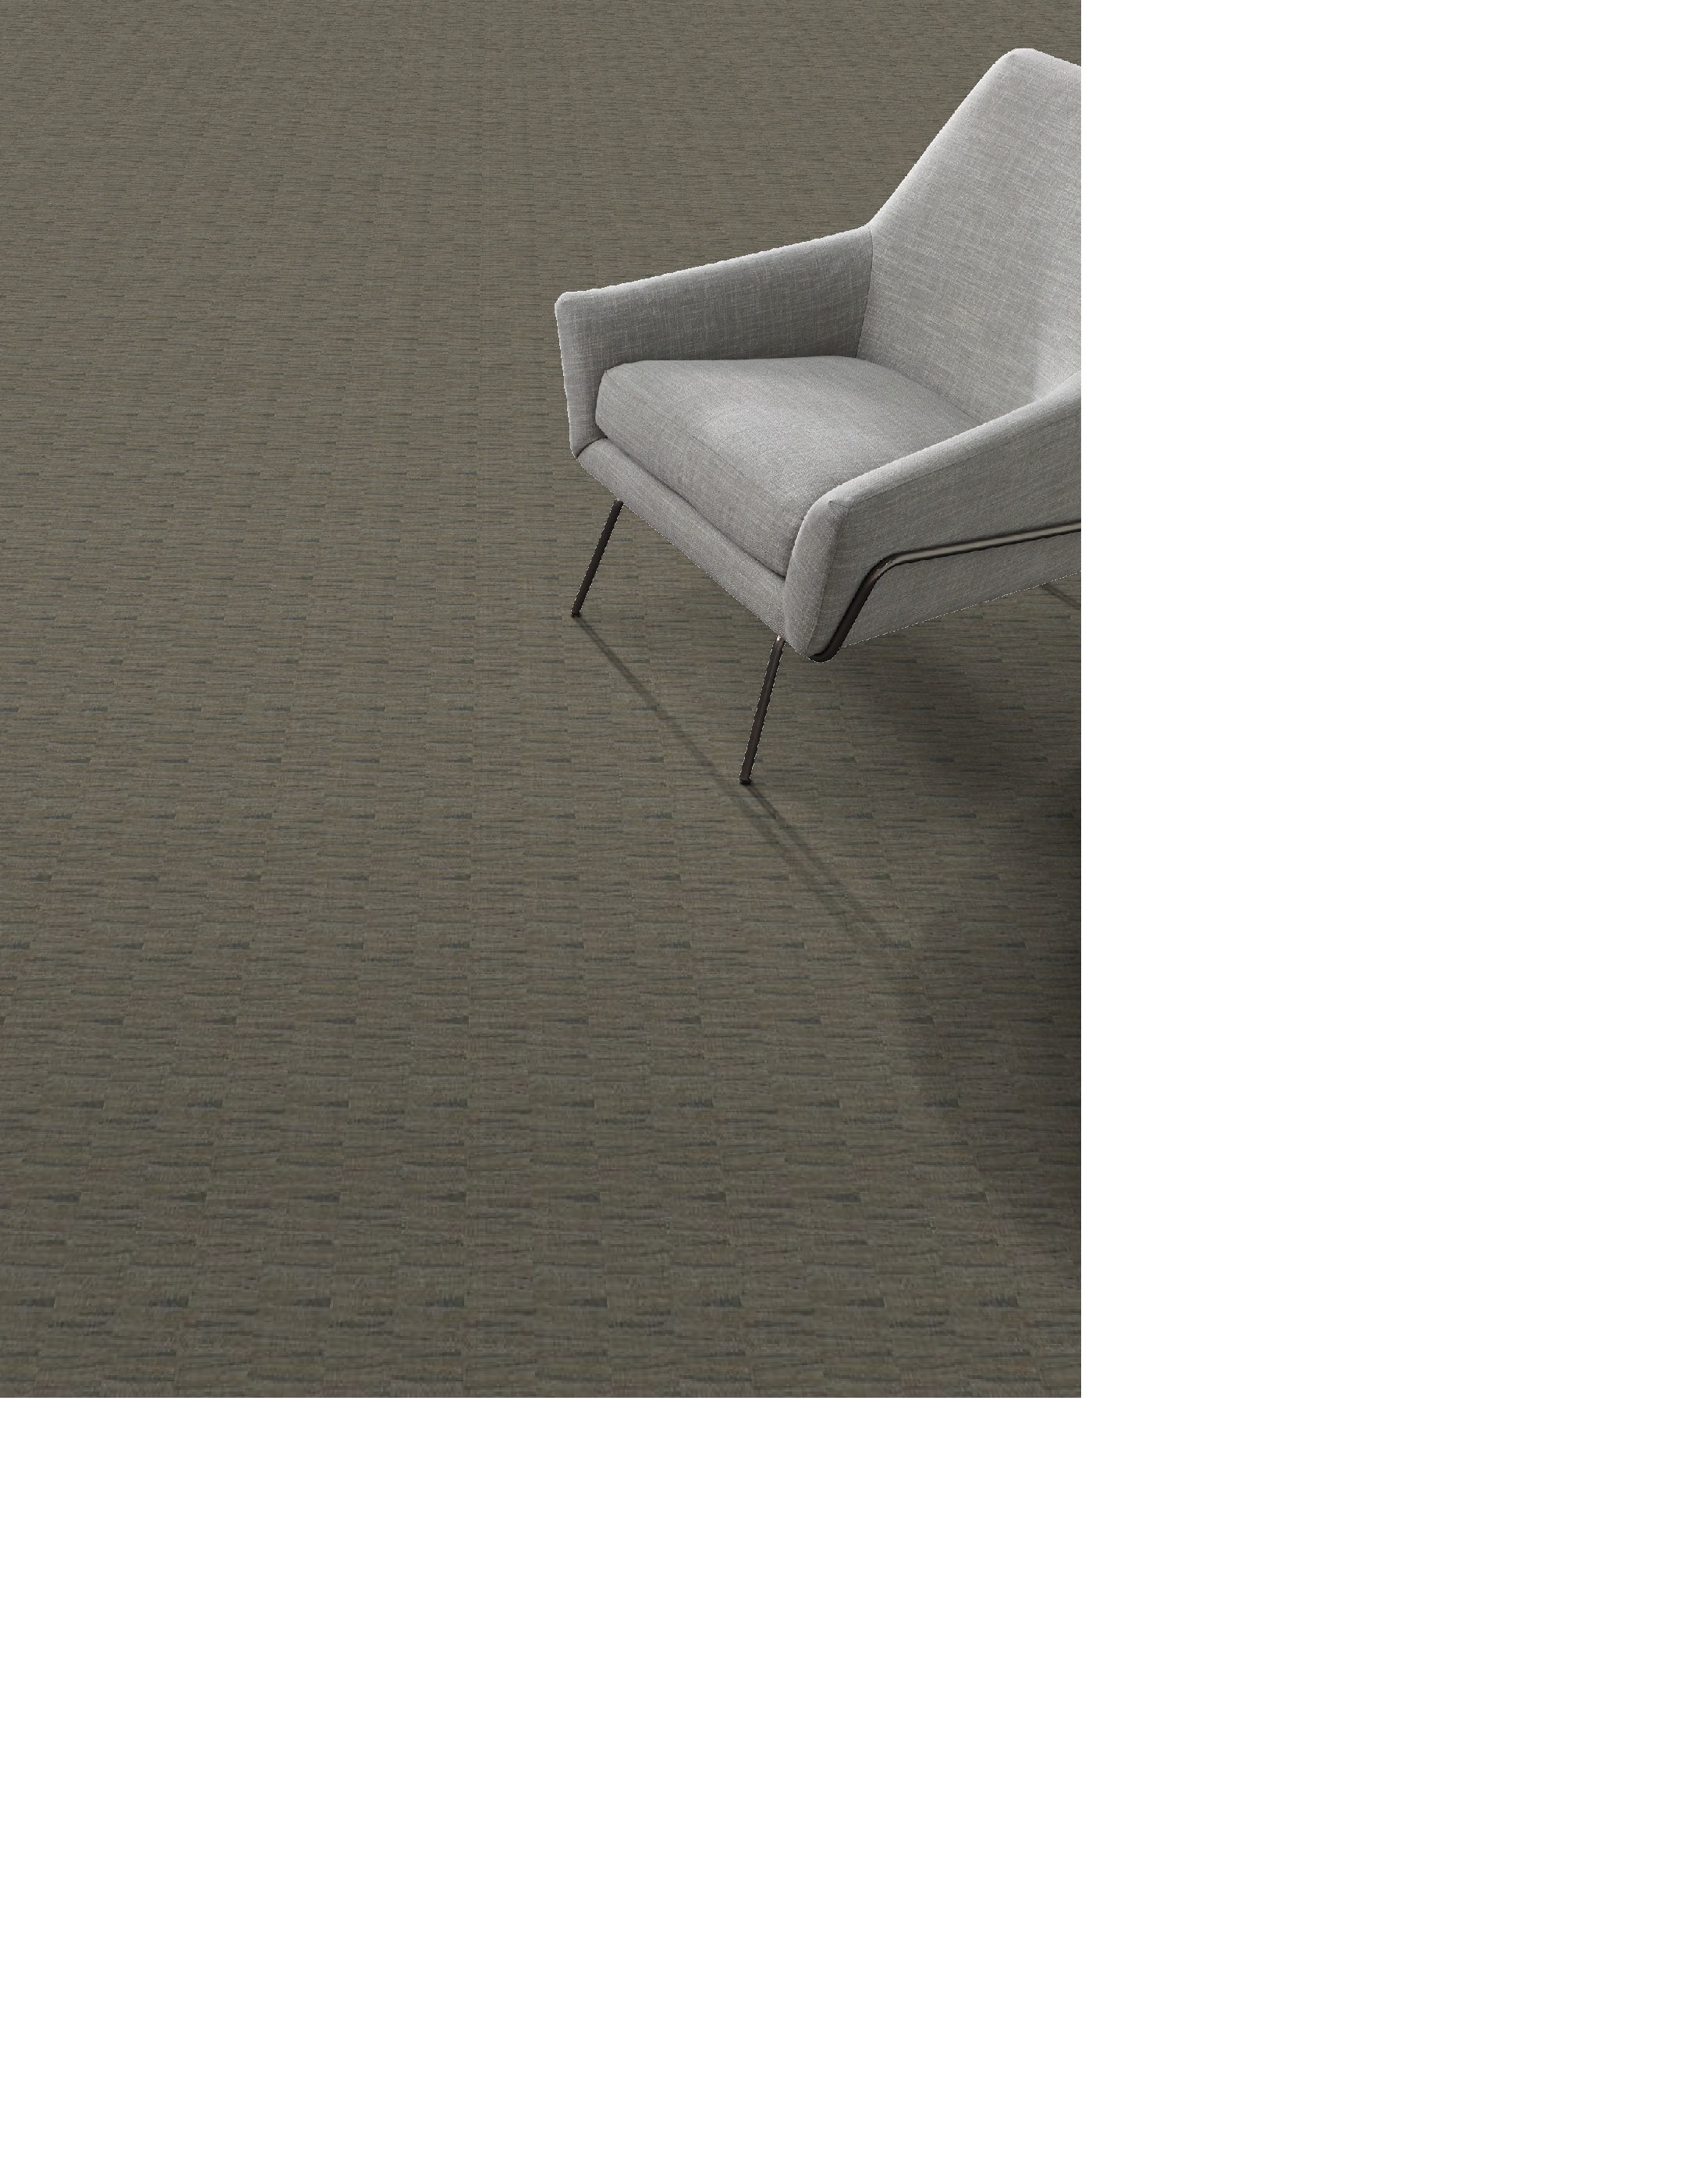 TAPER 32 55CHAMBRAY 1ST SHAW INDUSTRIES, INC CARPET 